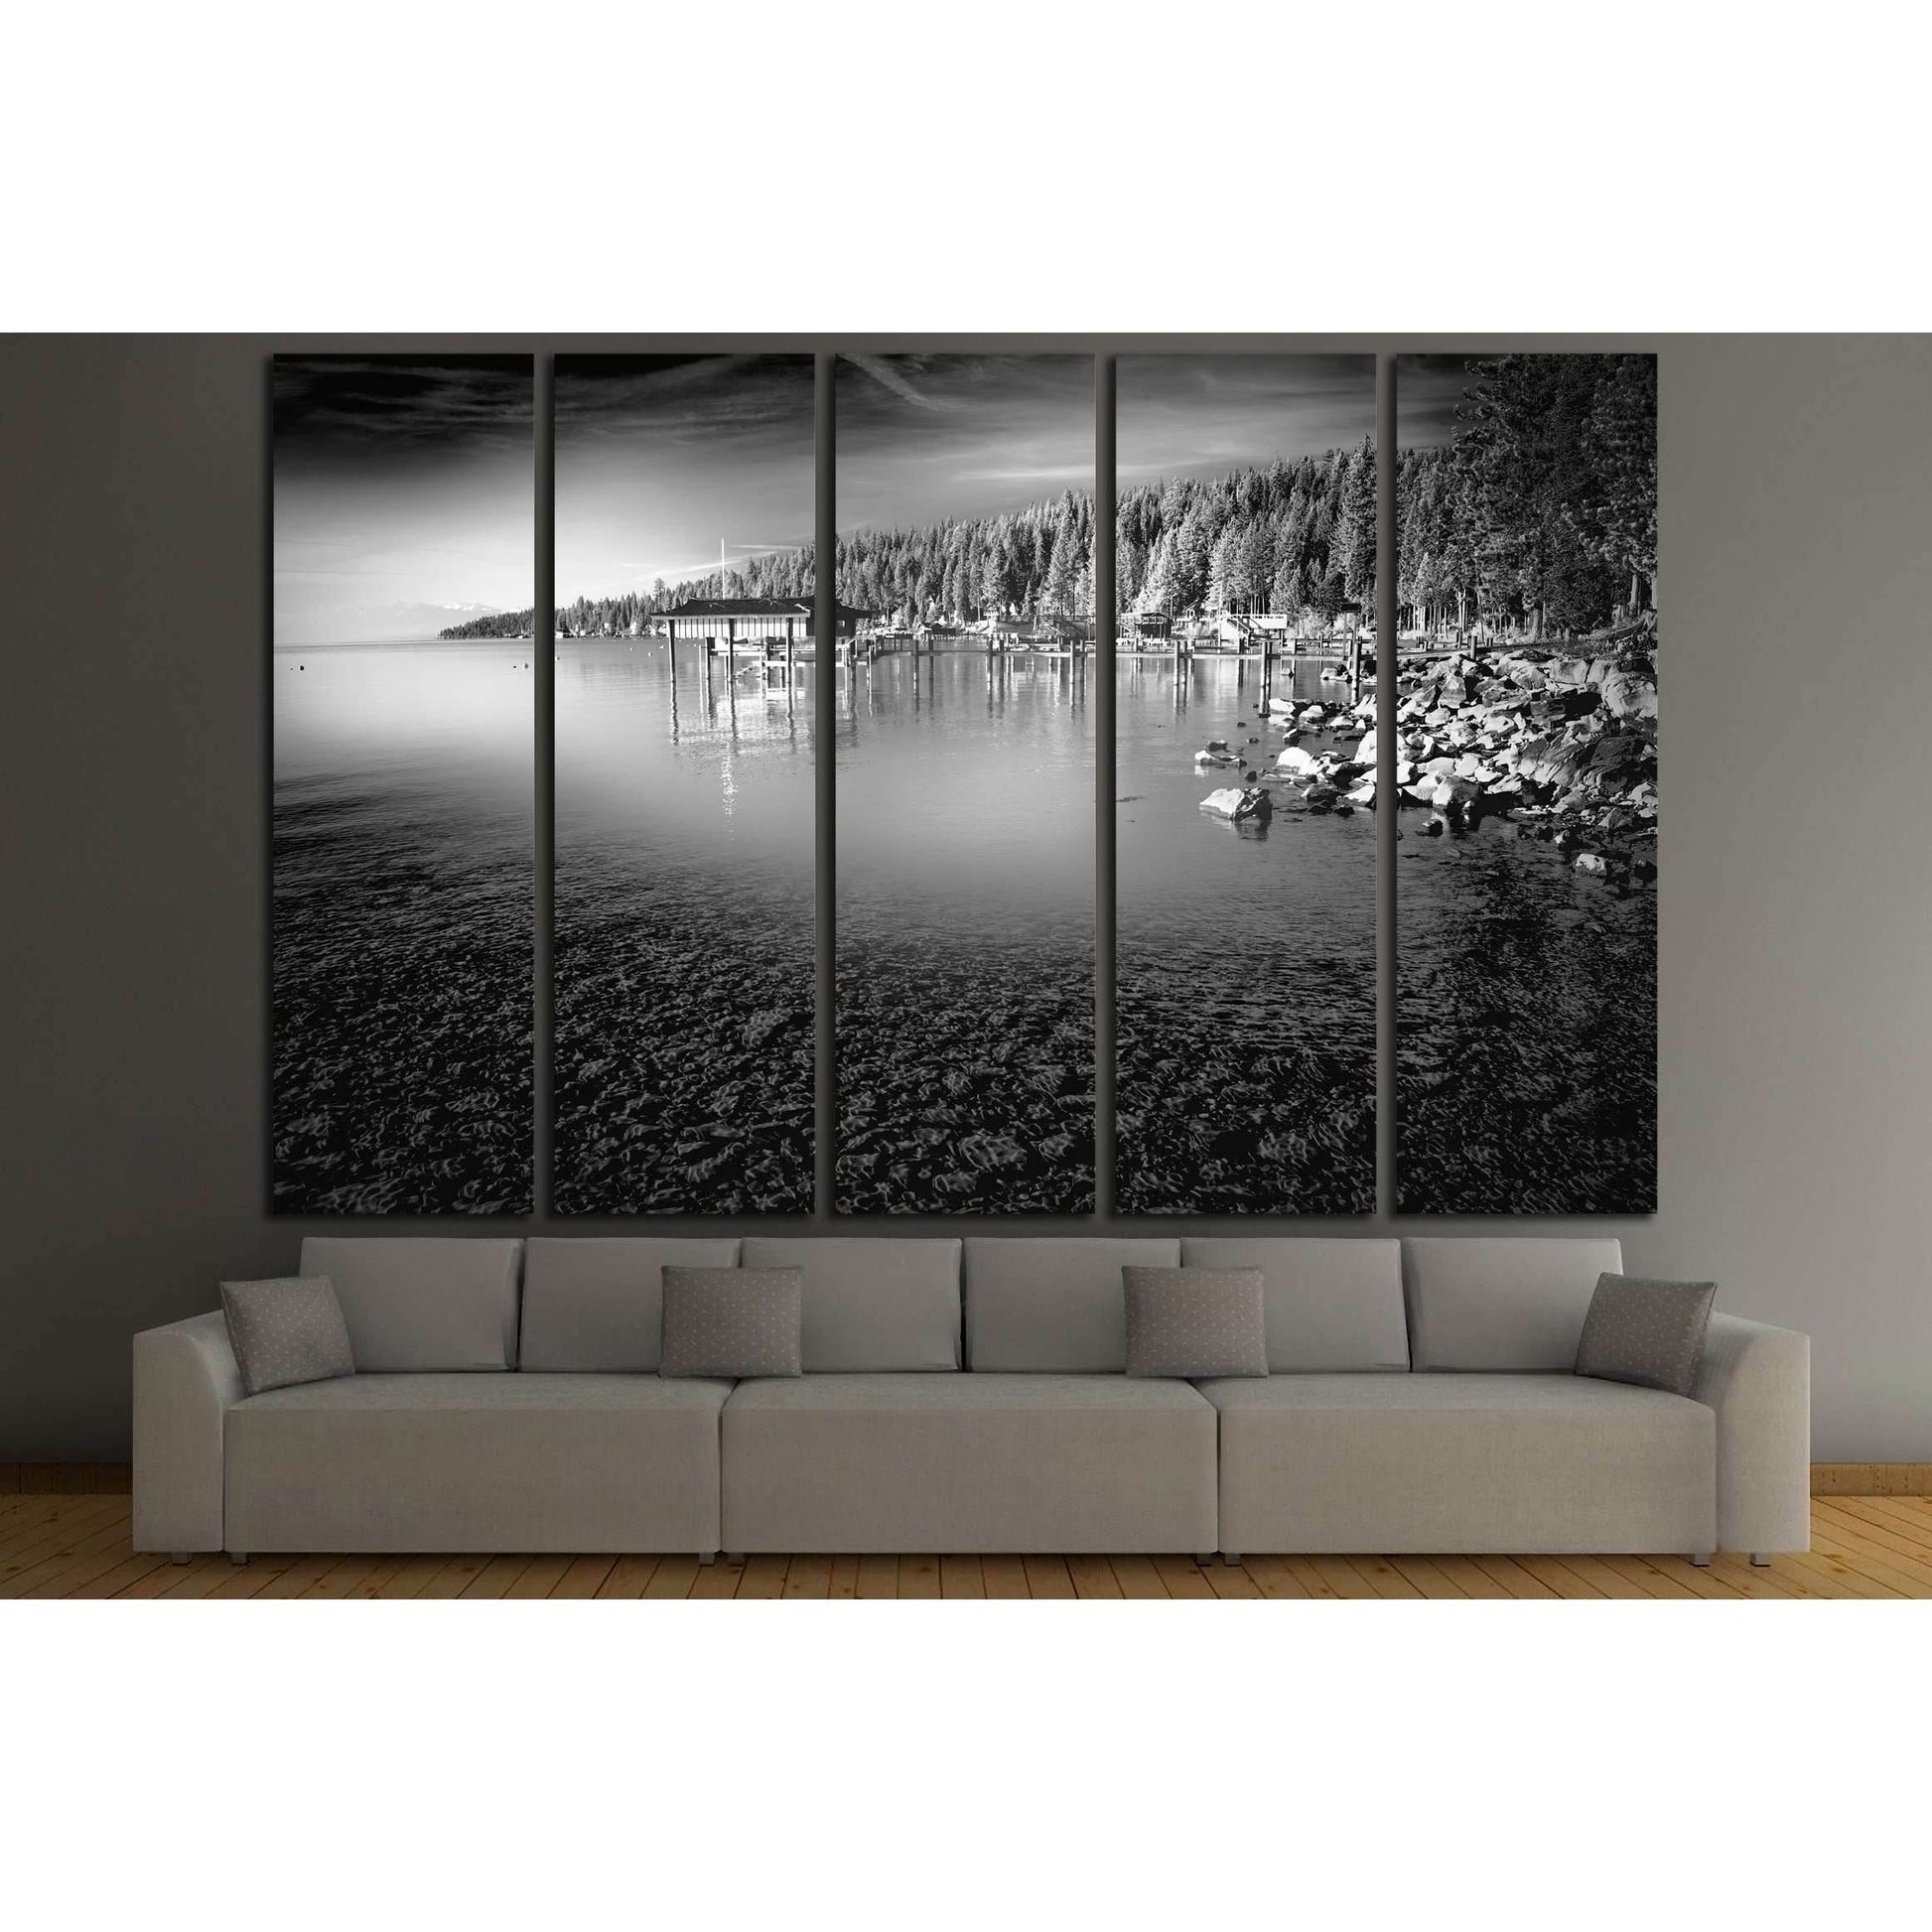 Black & White Lake Tahoe Canvas Art for Contemporary Home DecorThis canvas print features a monochromatic view of Lake Tahoe, with its pristine waters meeting a rugged shoreline, all under the watchful presence of evergreen forests. The grayscale tones ad